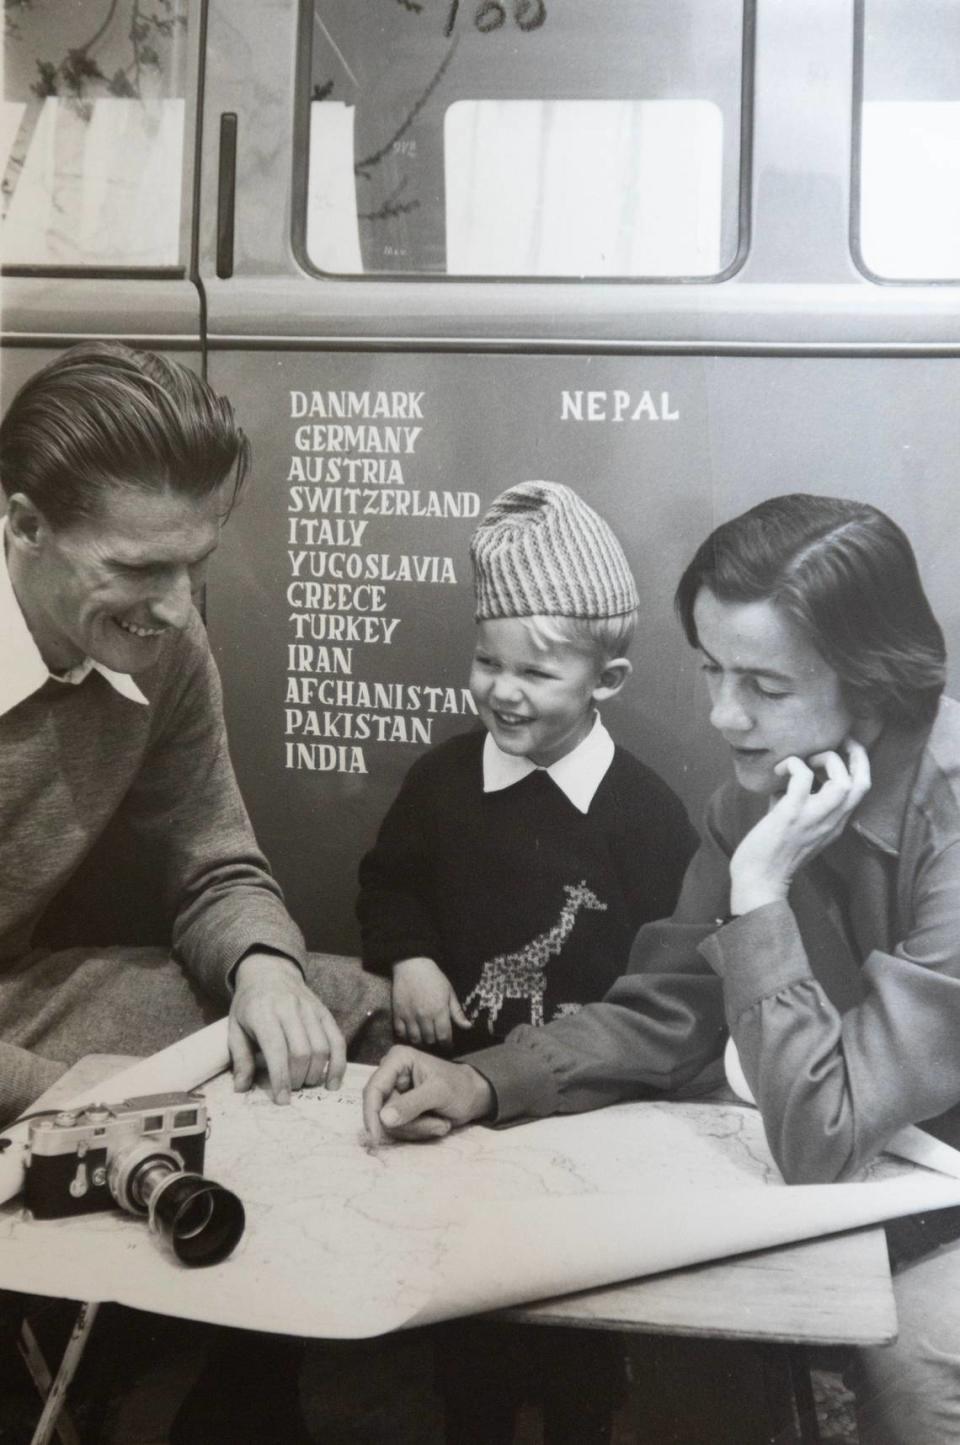 Schuyler Jones and his first wife, Lis Margot Sondergaard Rasmussen, and their son, Peter, outside the Volkswagen they traveled in from Denmark to Nepal.